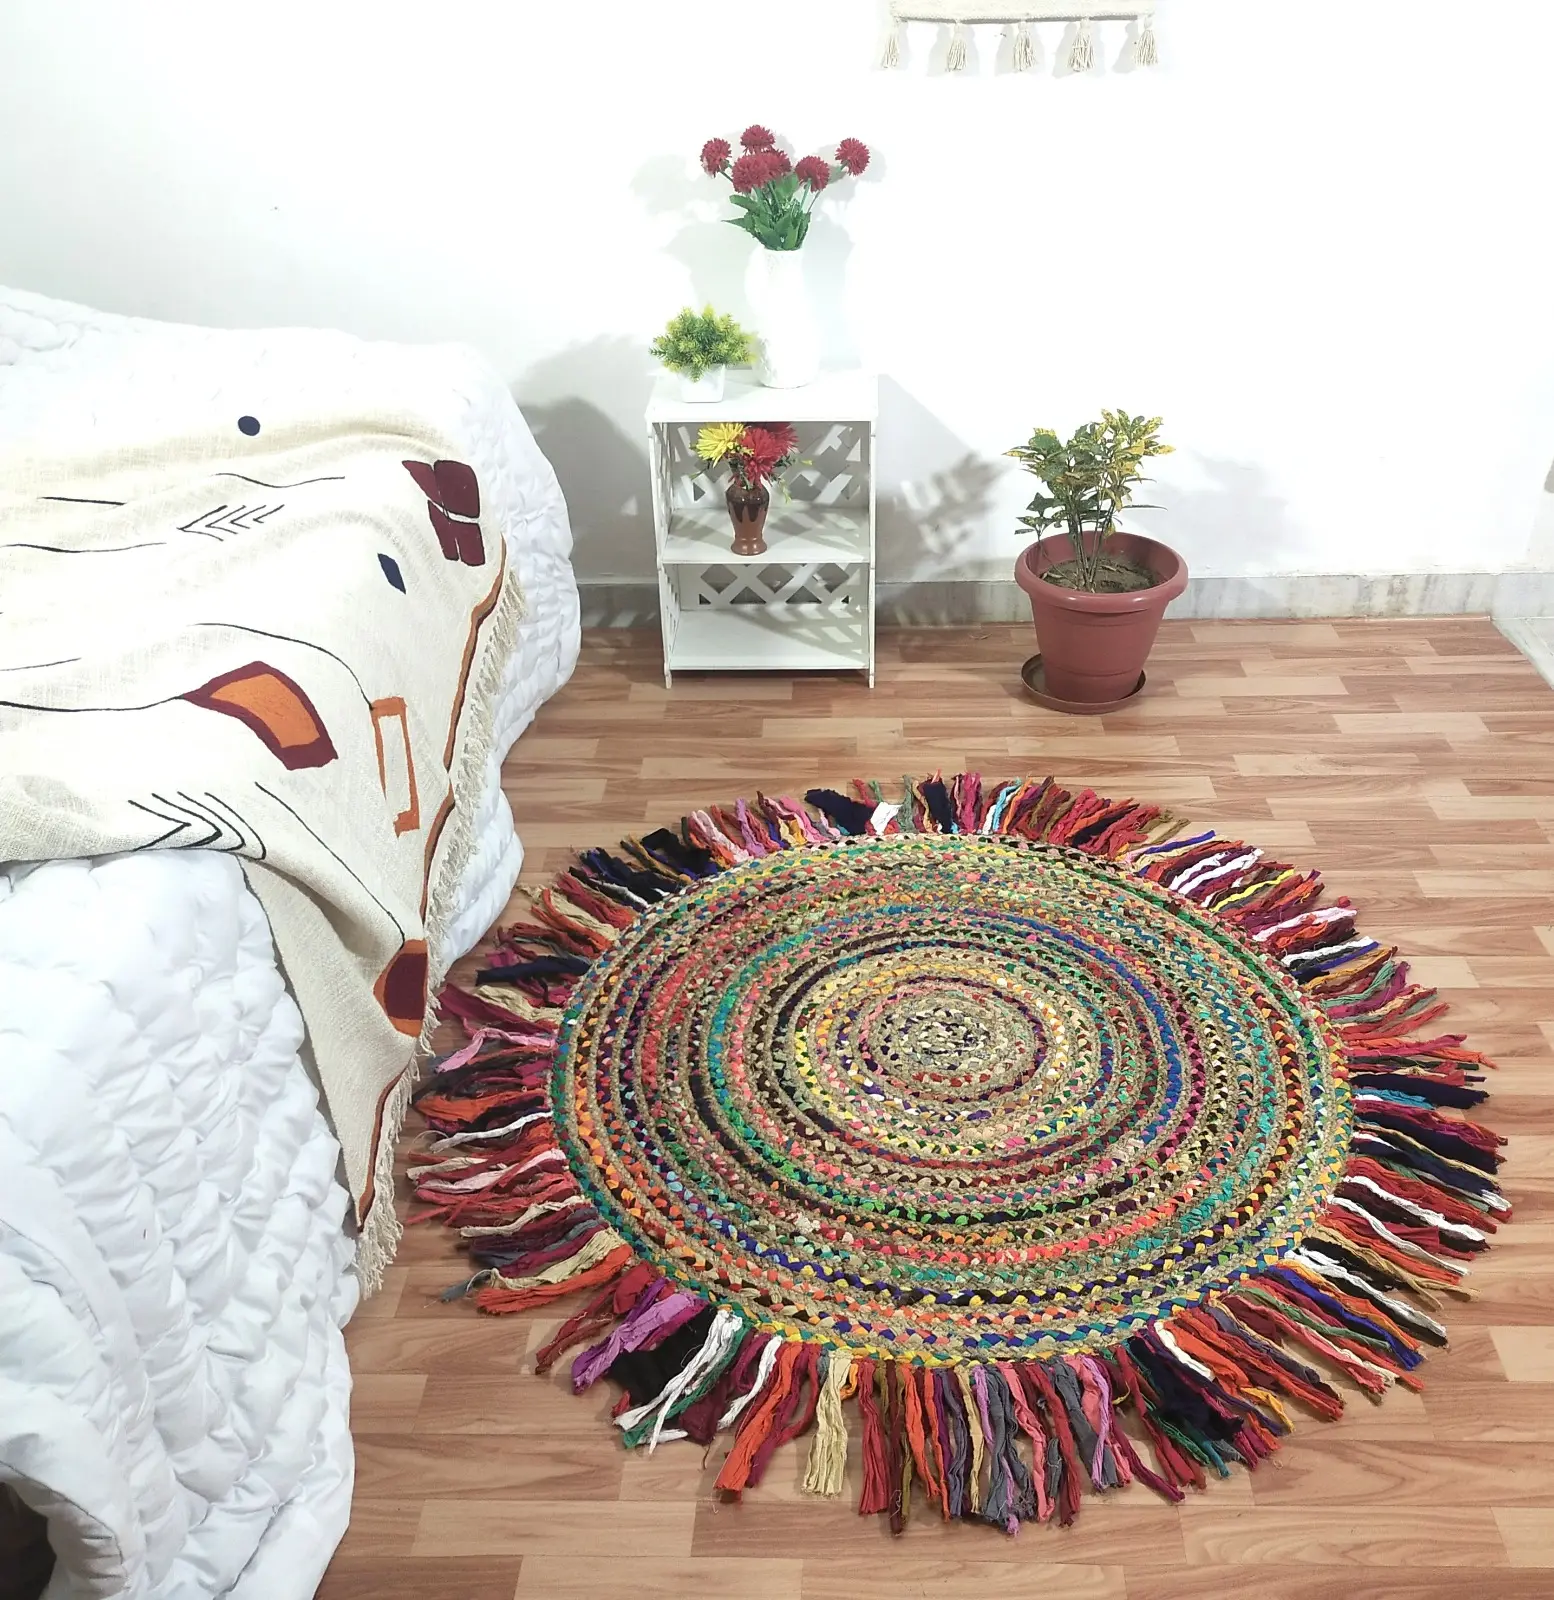 Round Jute Carpet For Prayer Room Hand Braided Embroidered Jute Rug Runner Bulk Product Best Quality From India